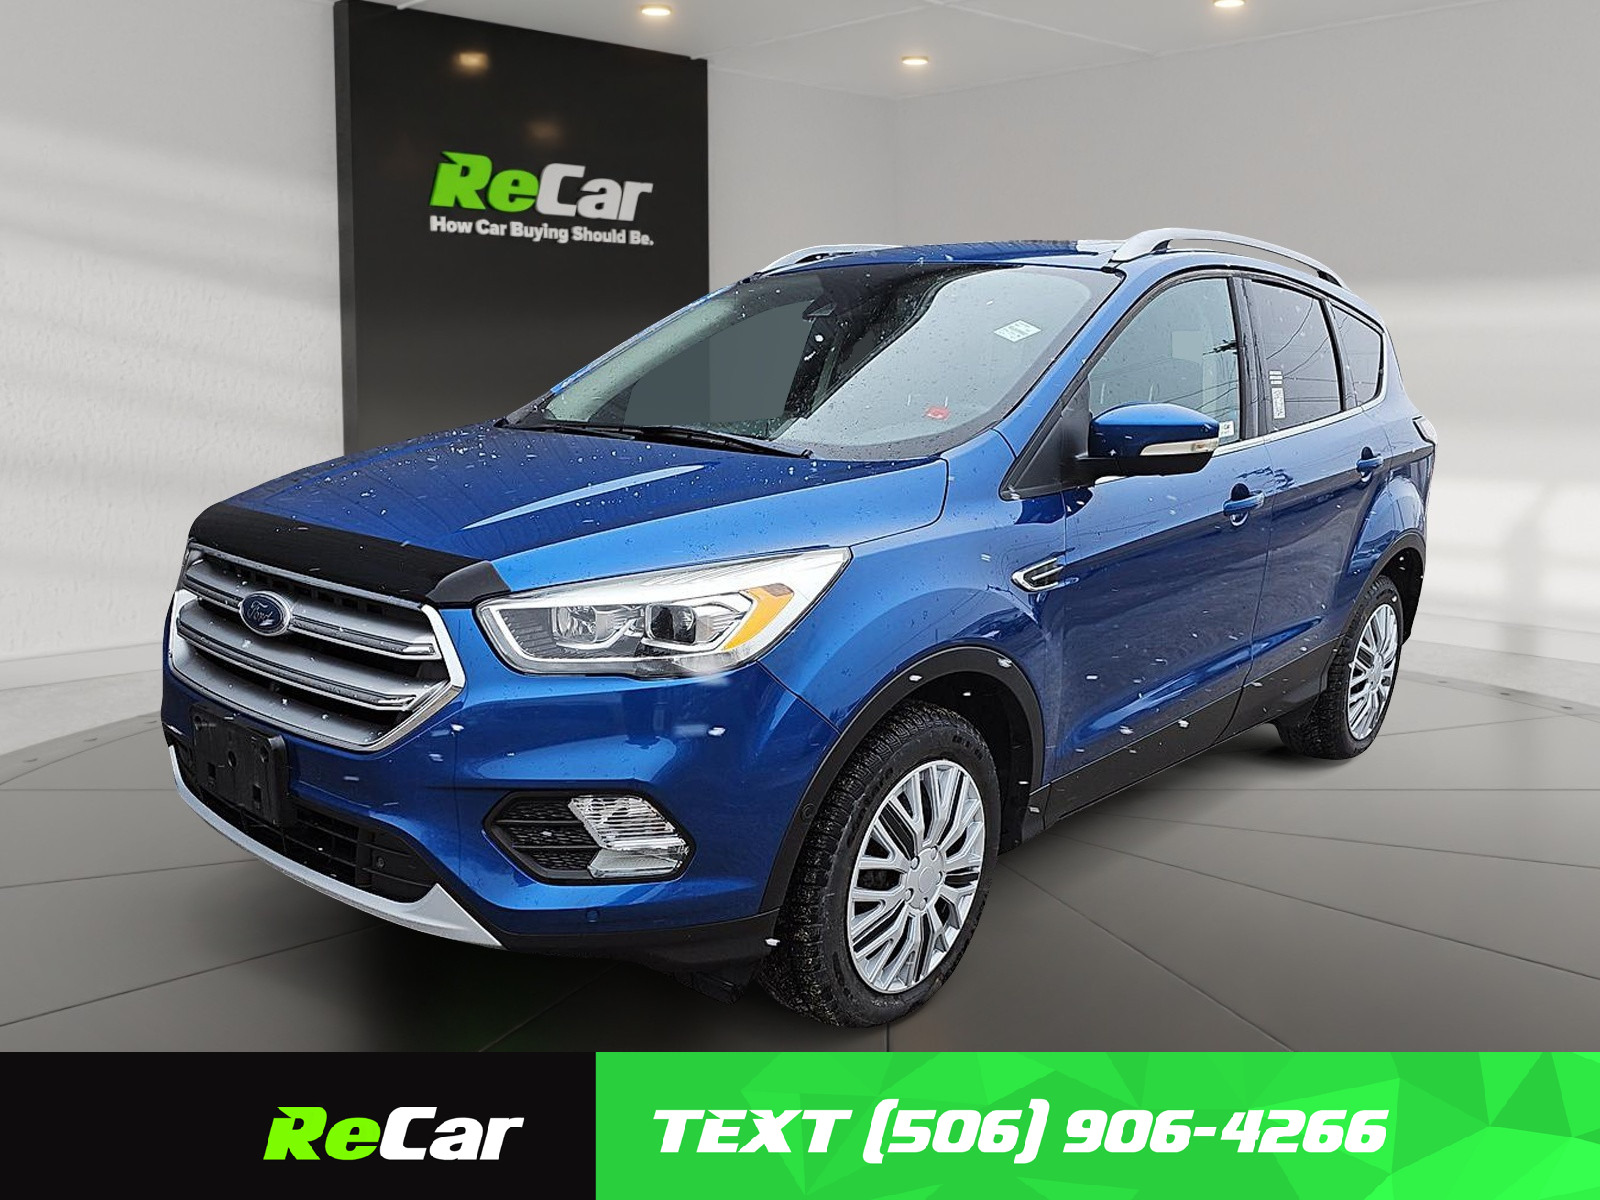 2017 Ford Escape 4x4 | Dual Climate Control | Heated Leather Seats 